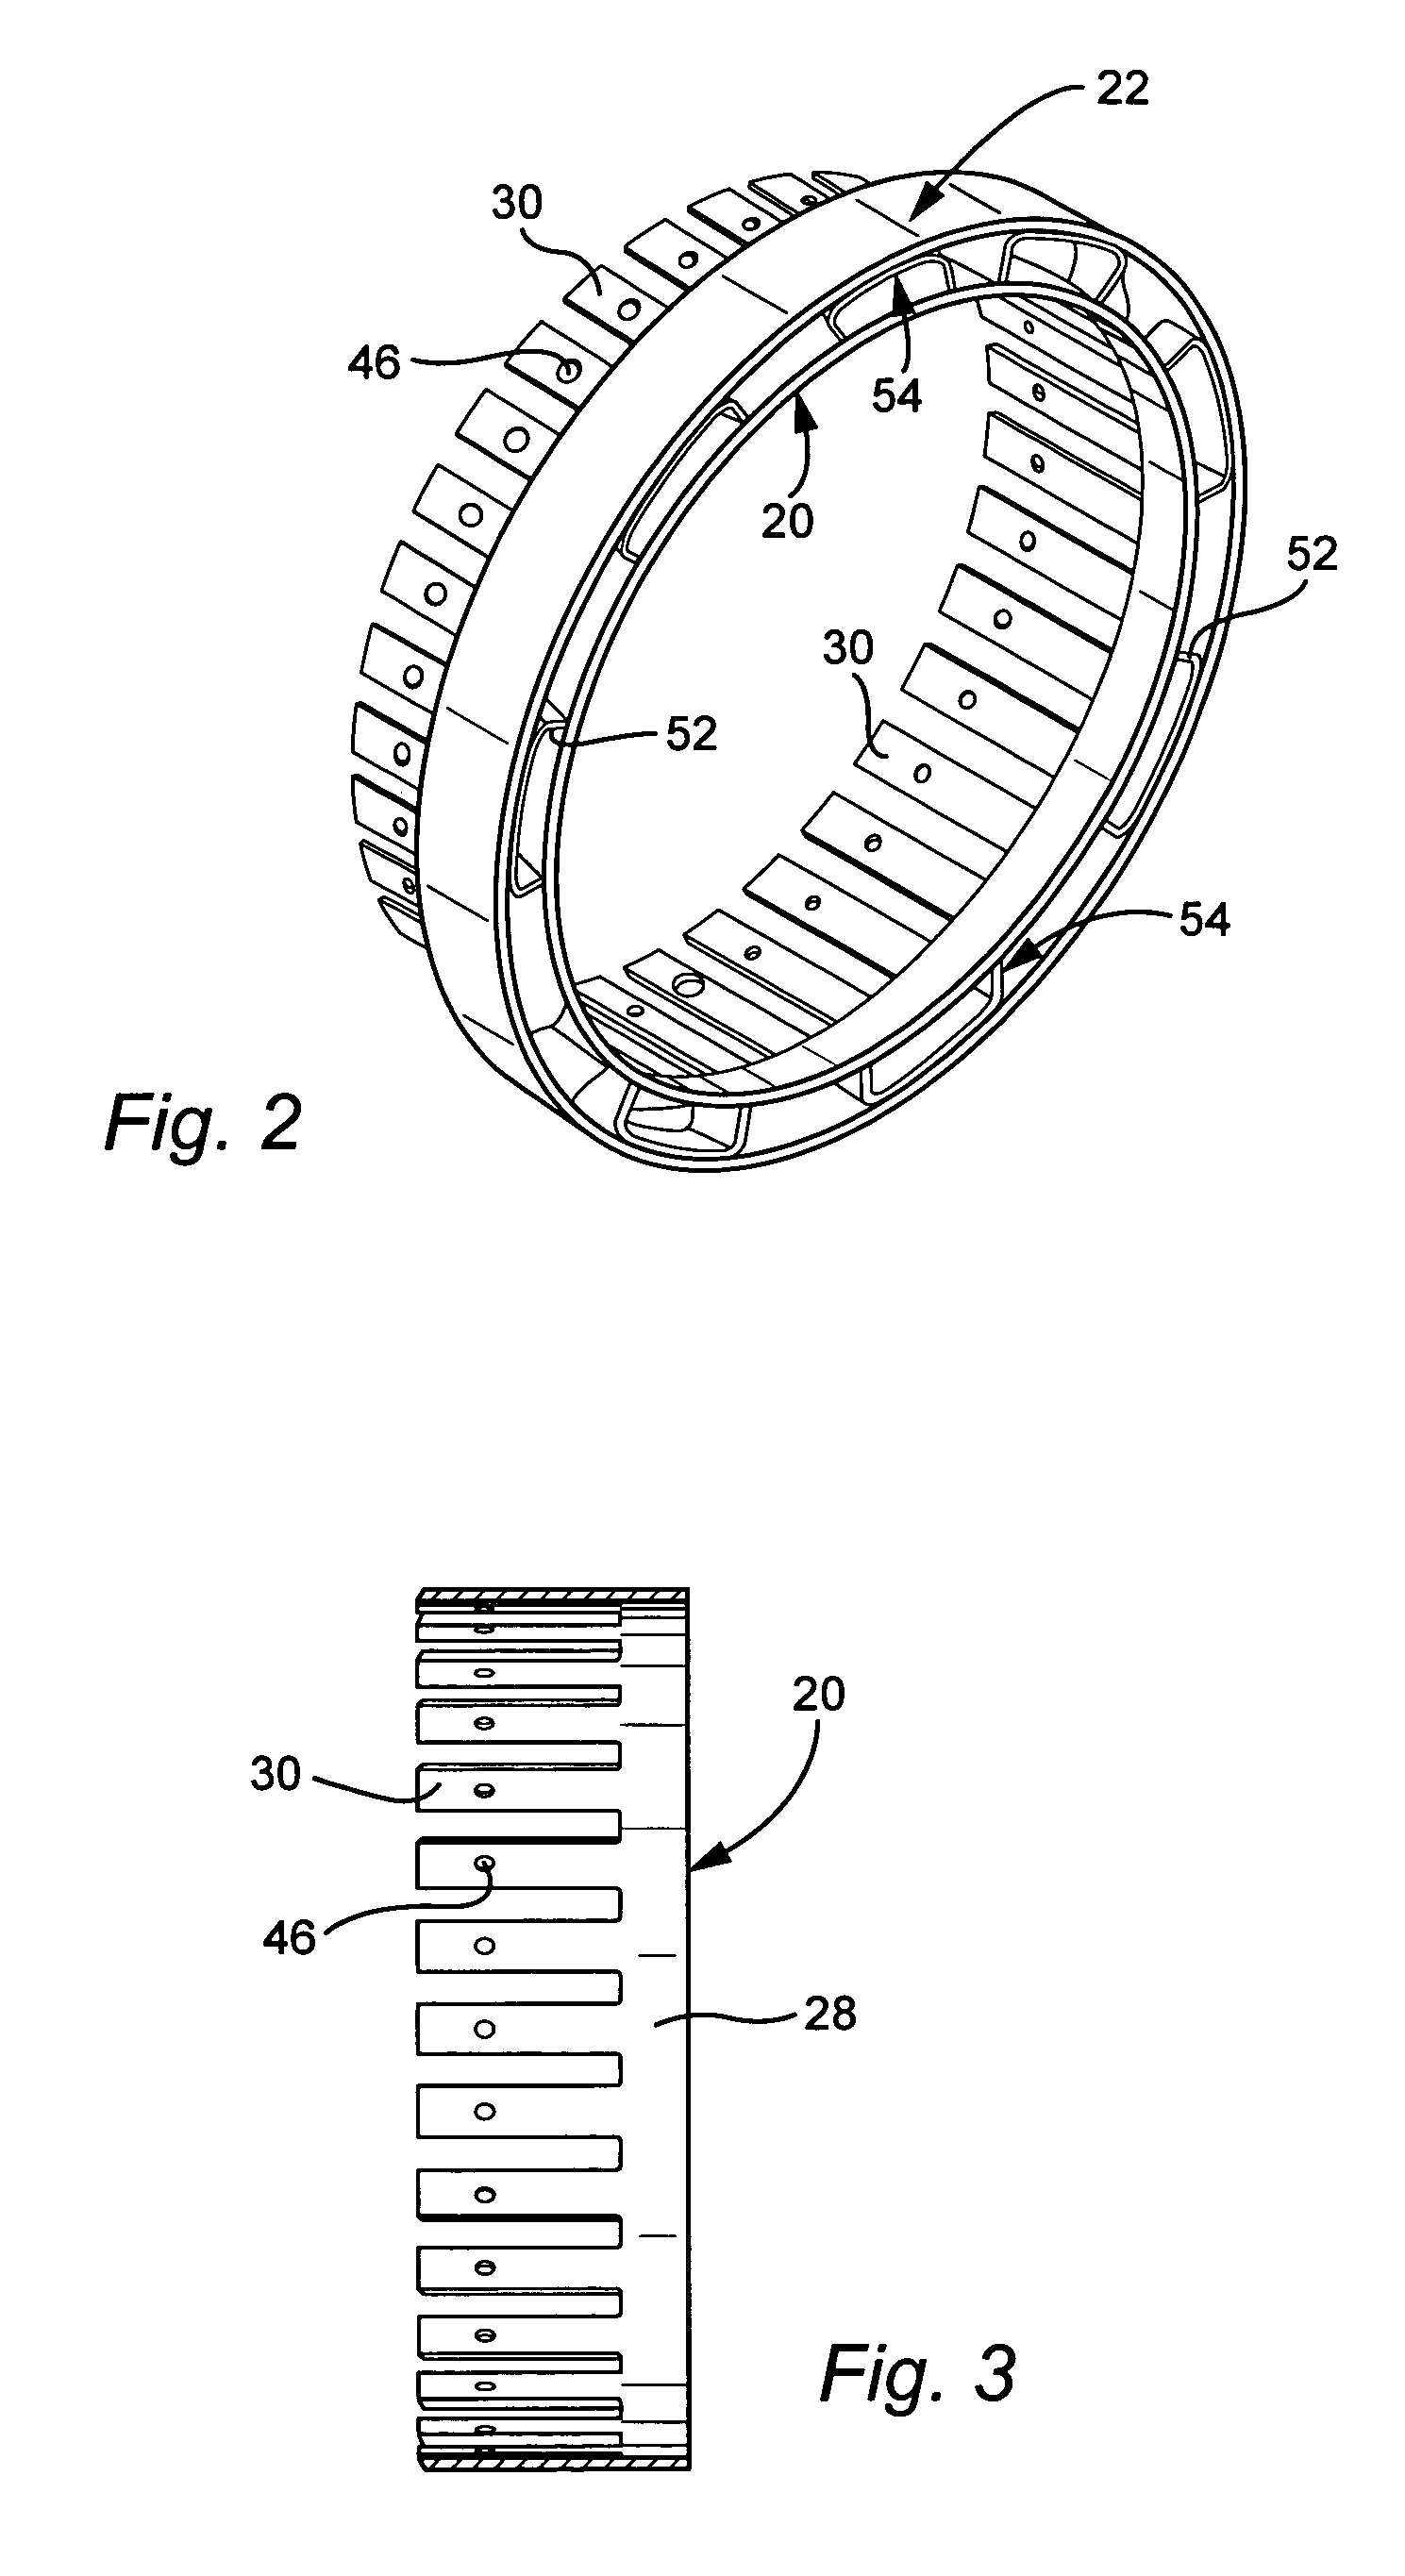 Bolting configuration for joining ceramic combustor liner to metal mounting attachments